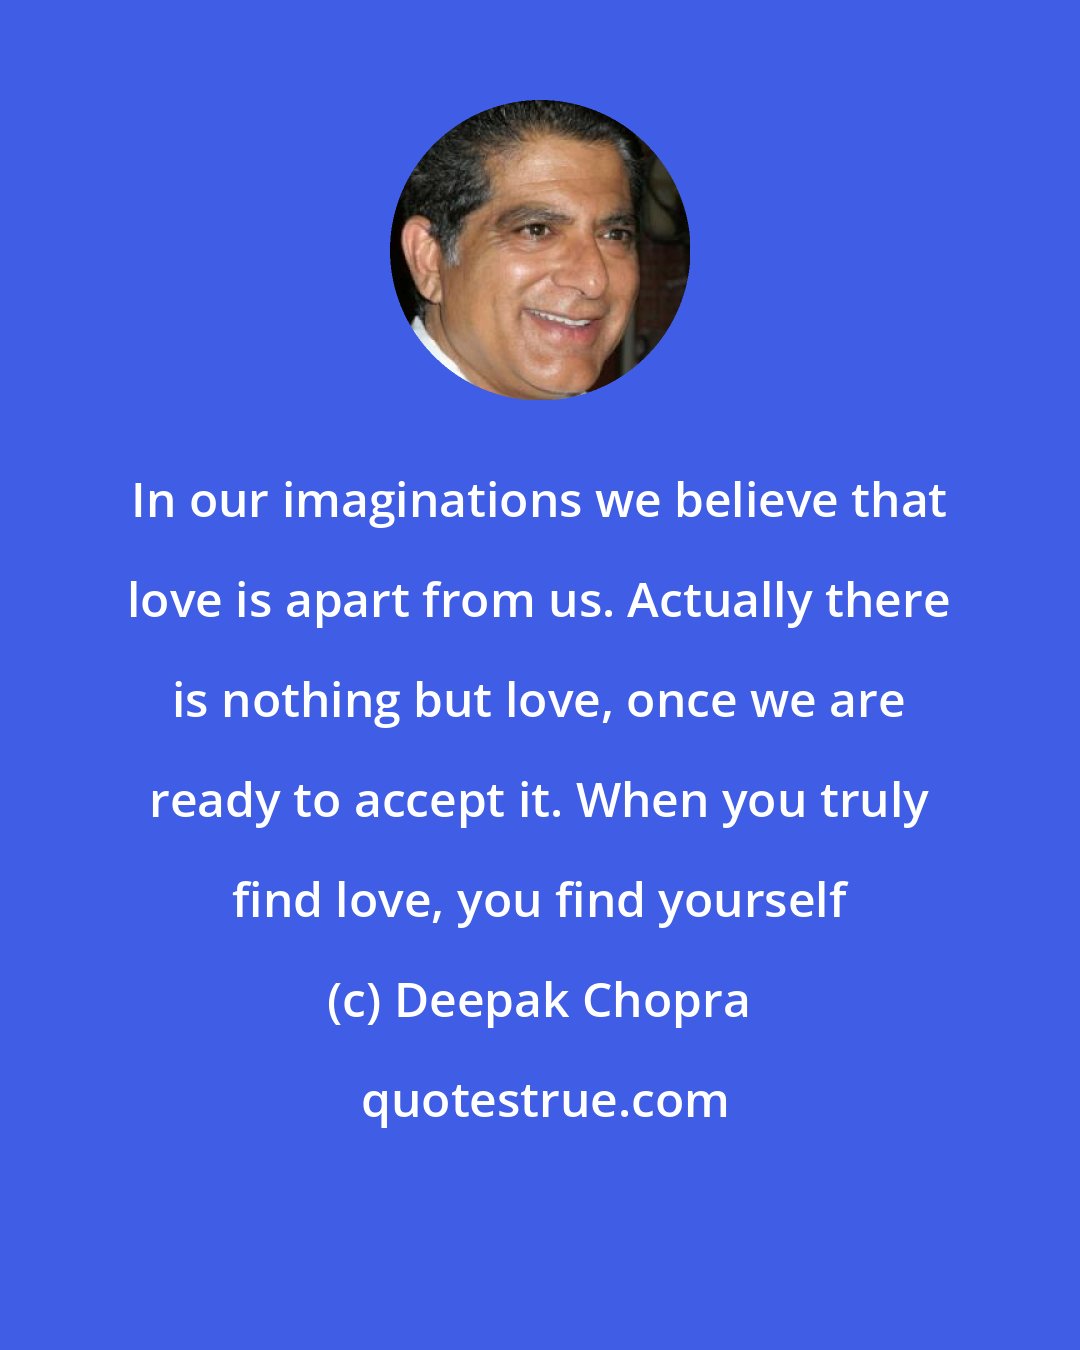 Deepak Chopra: In our imaginations we believe that love is apart from us. Actually there is nothing but love, once we are ready to accept it. When you truly find love, you find yourself